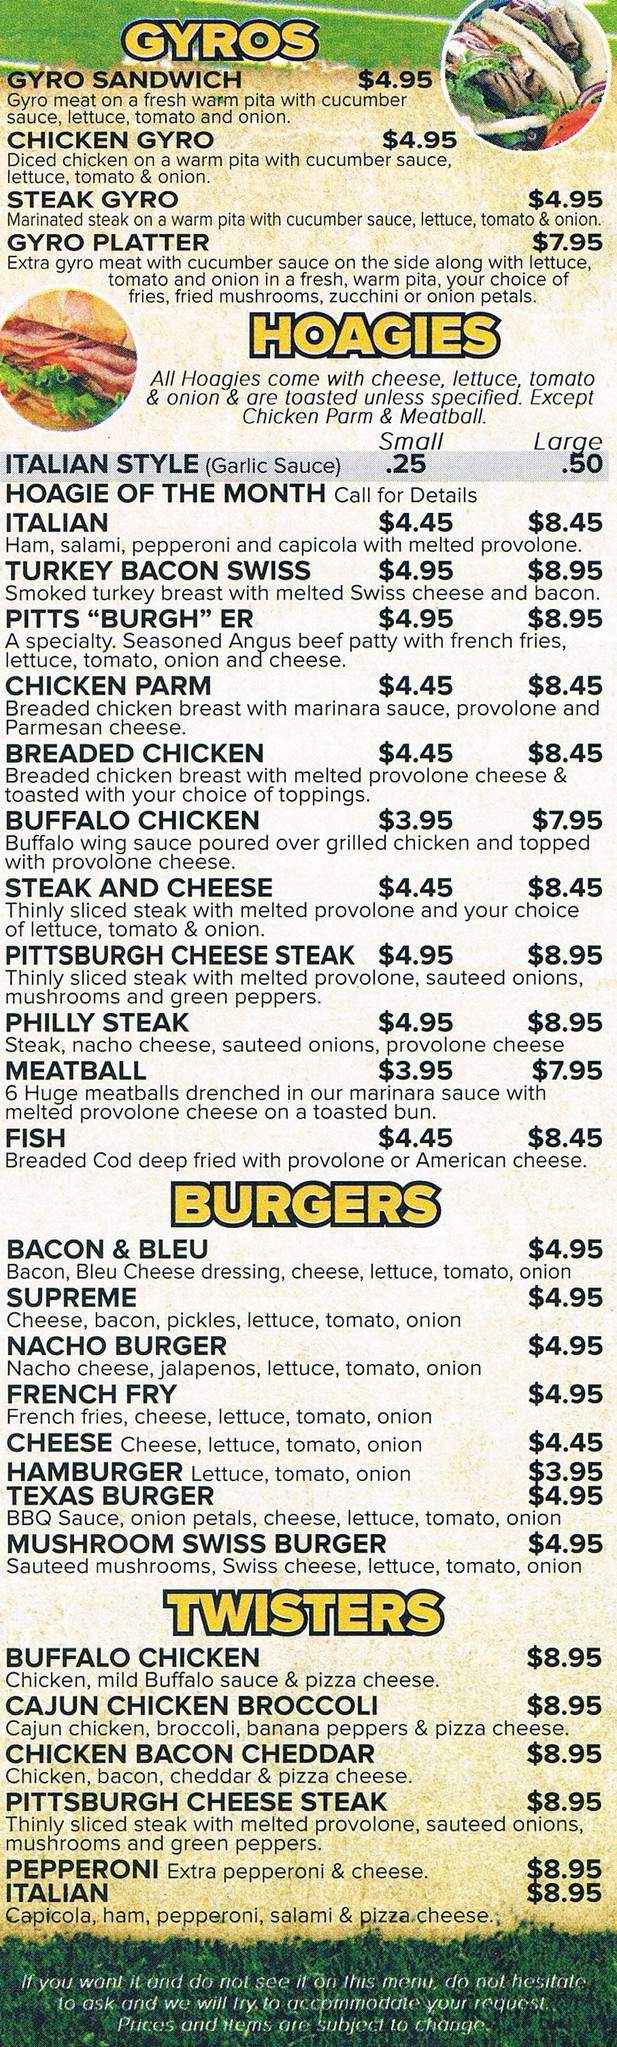 /380228579/Sports-Town-Pizza-and-Grill-New-Kensington-PA - Lower Burrell, PA